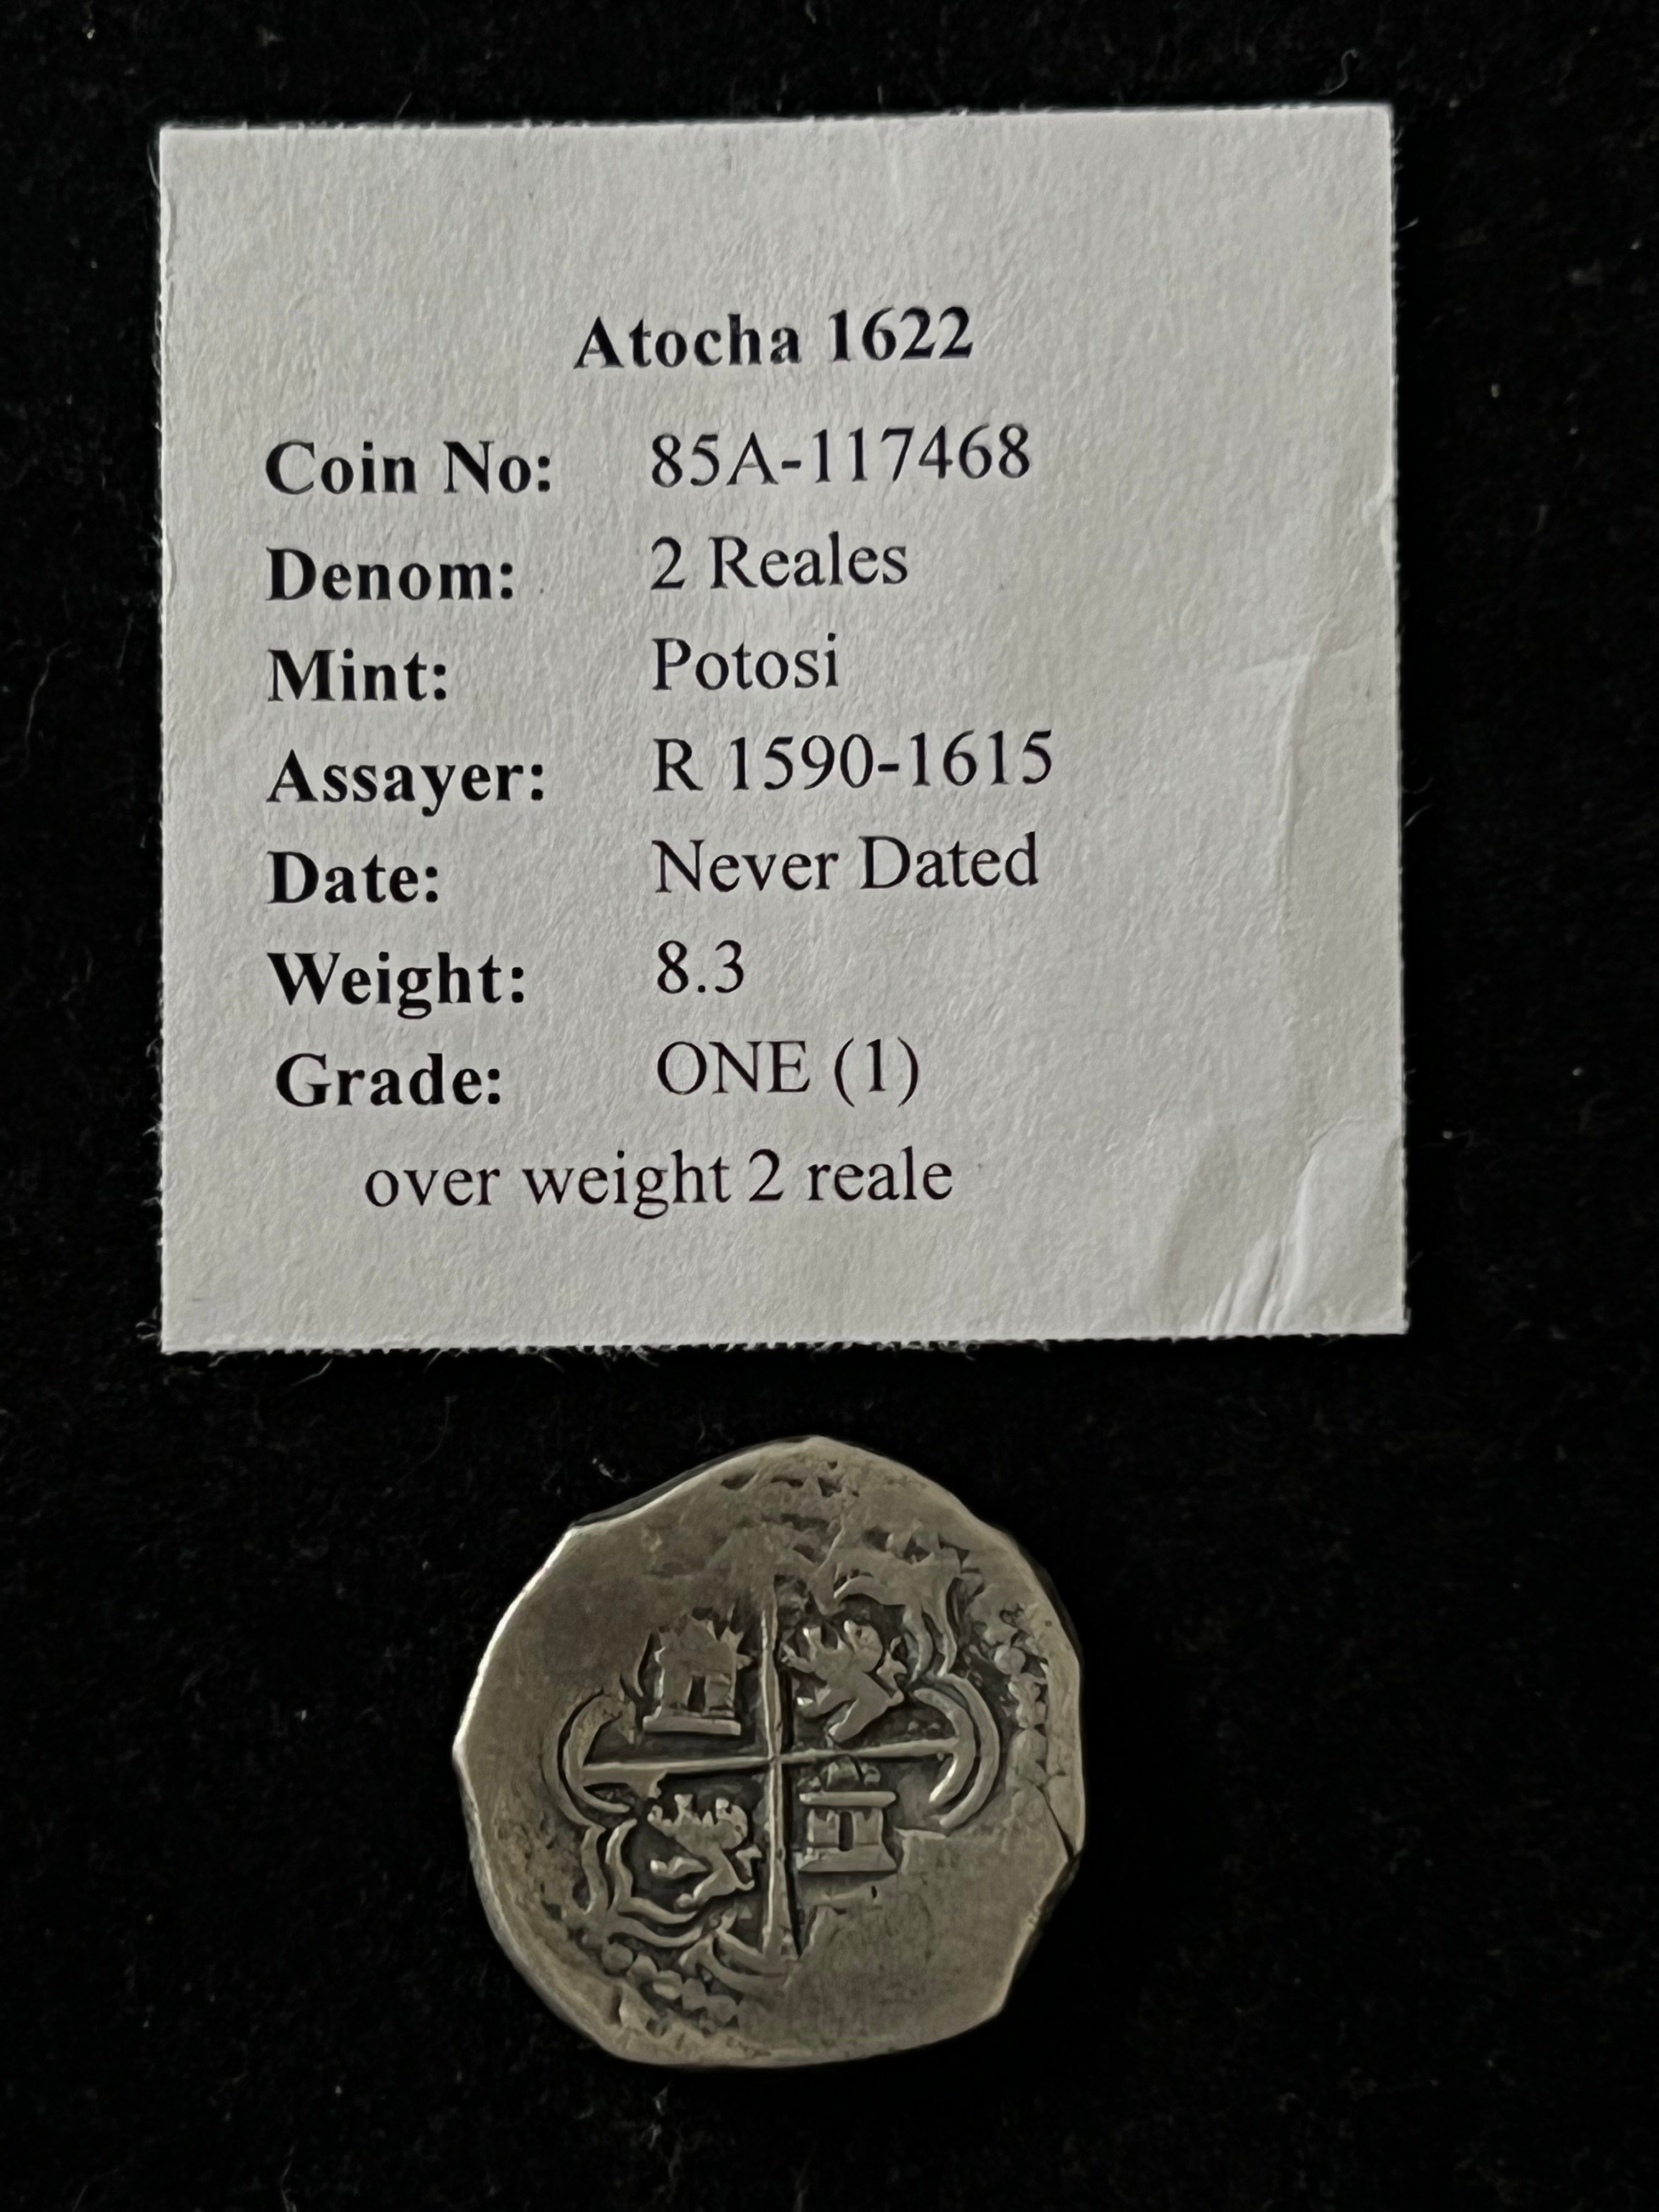 Atocha 2 Reales Grade 1 (OVERWEIGHT COIN)